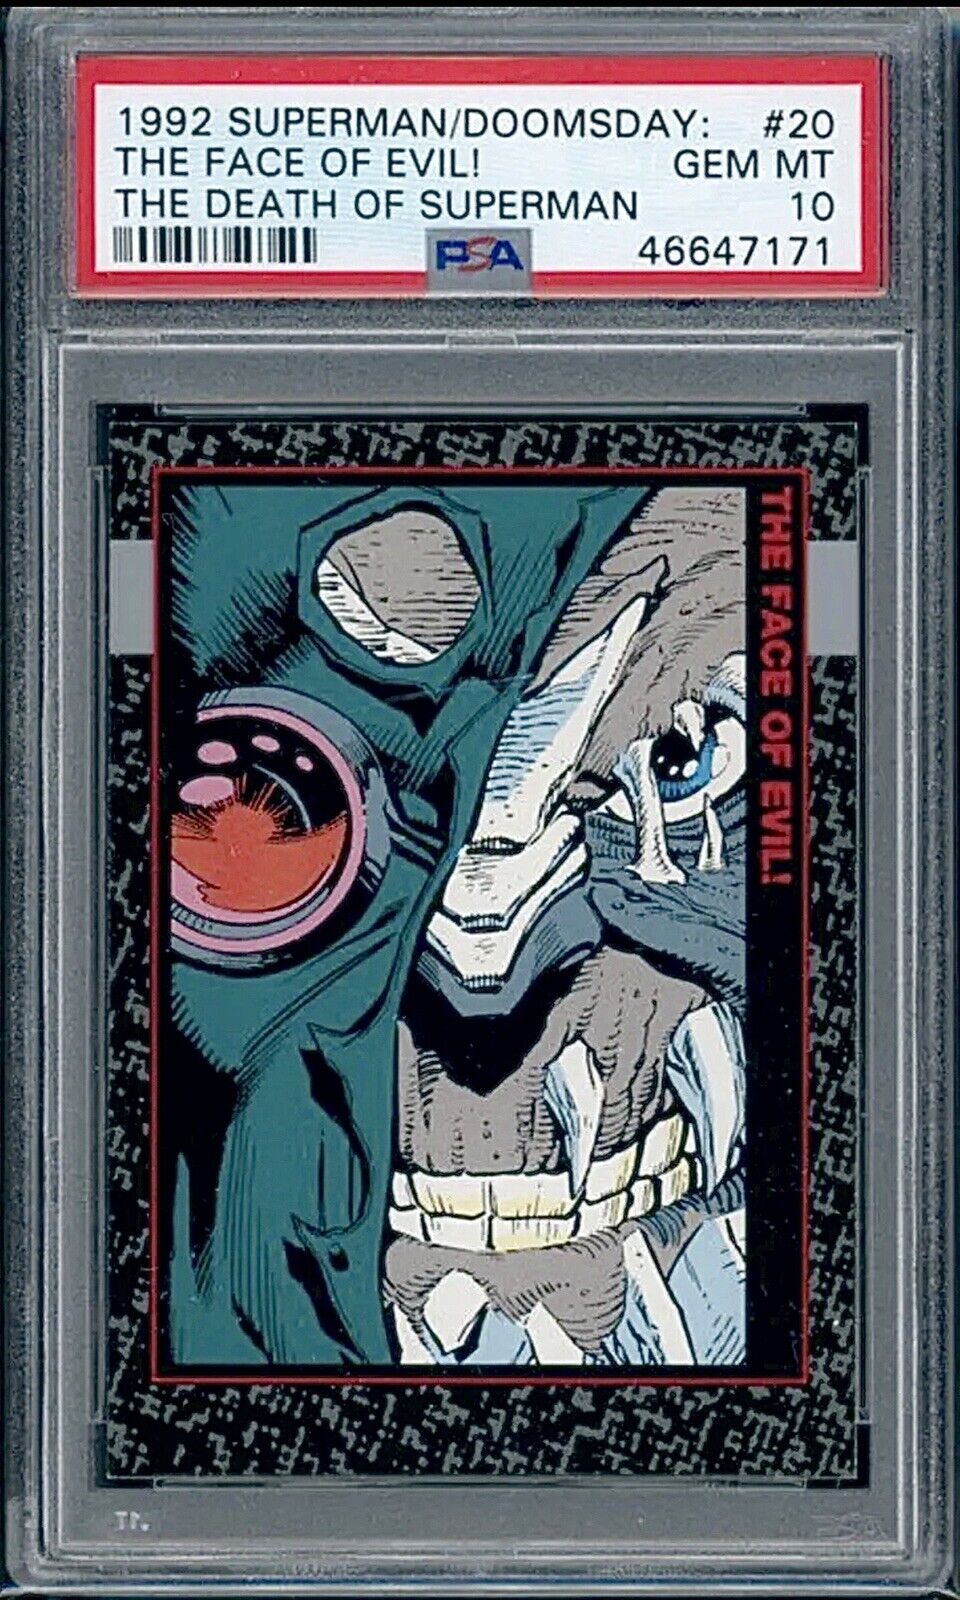 1992 Superman Doomsday The Death of Superman #20 The Face of Evil PSA 10 🔥RARE